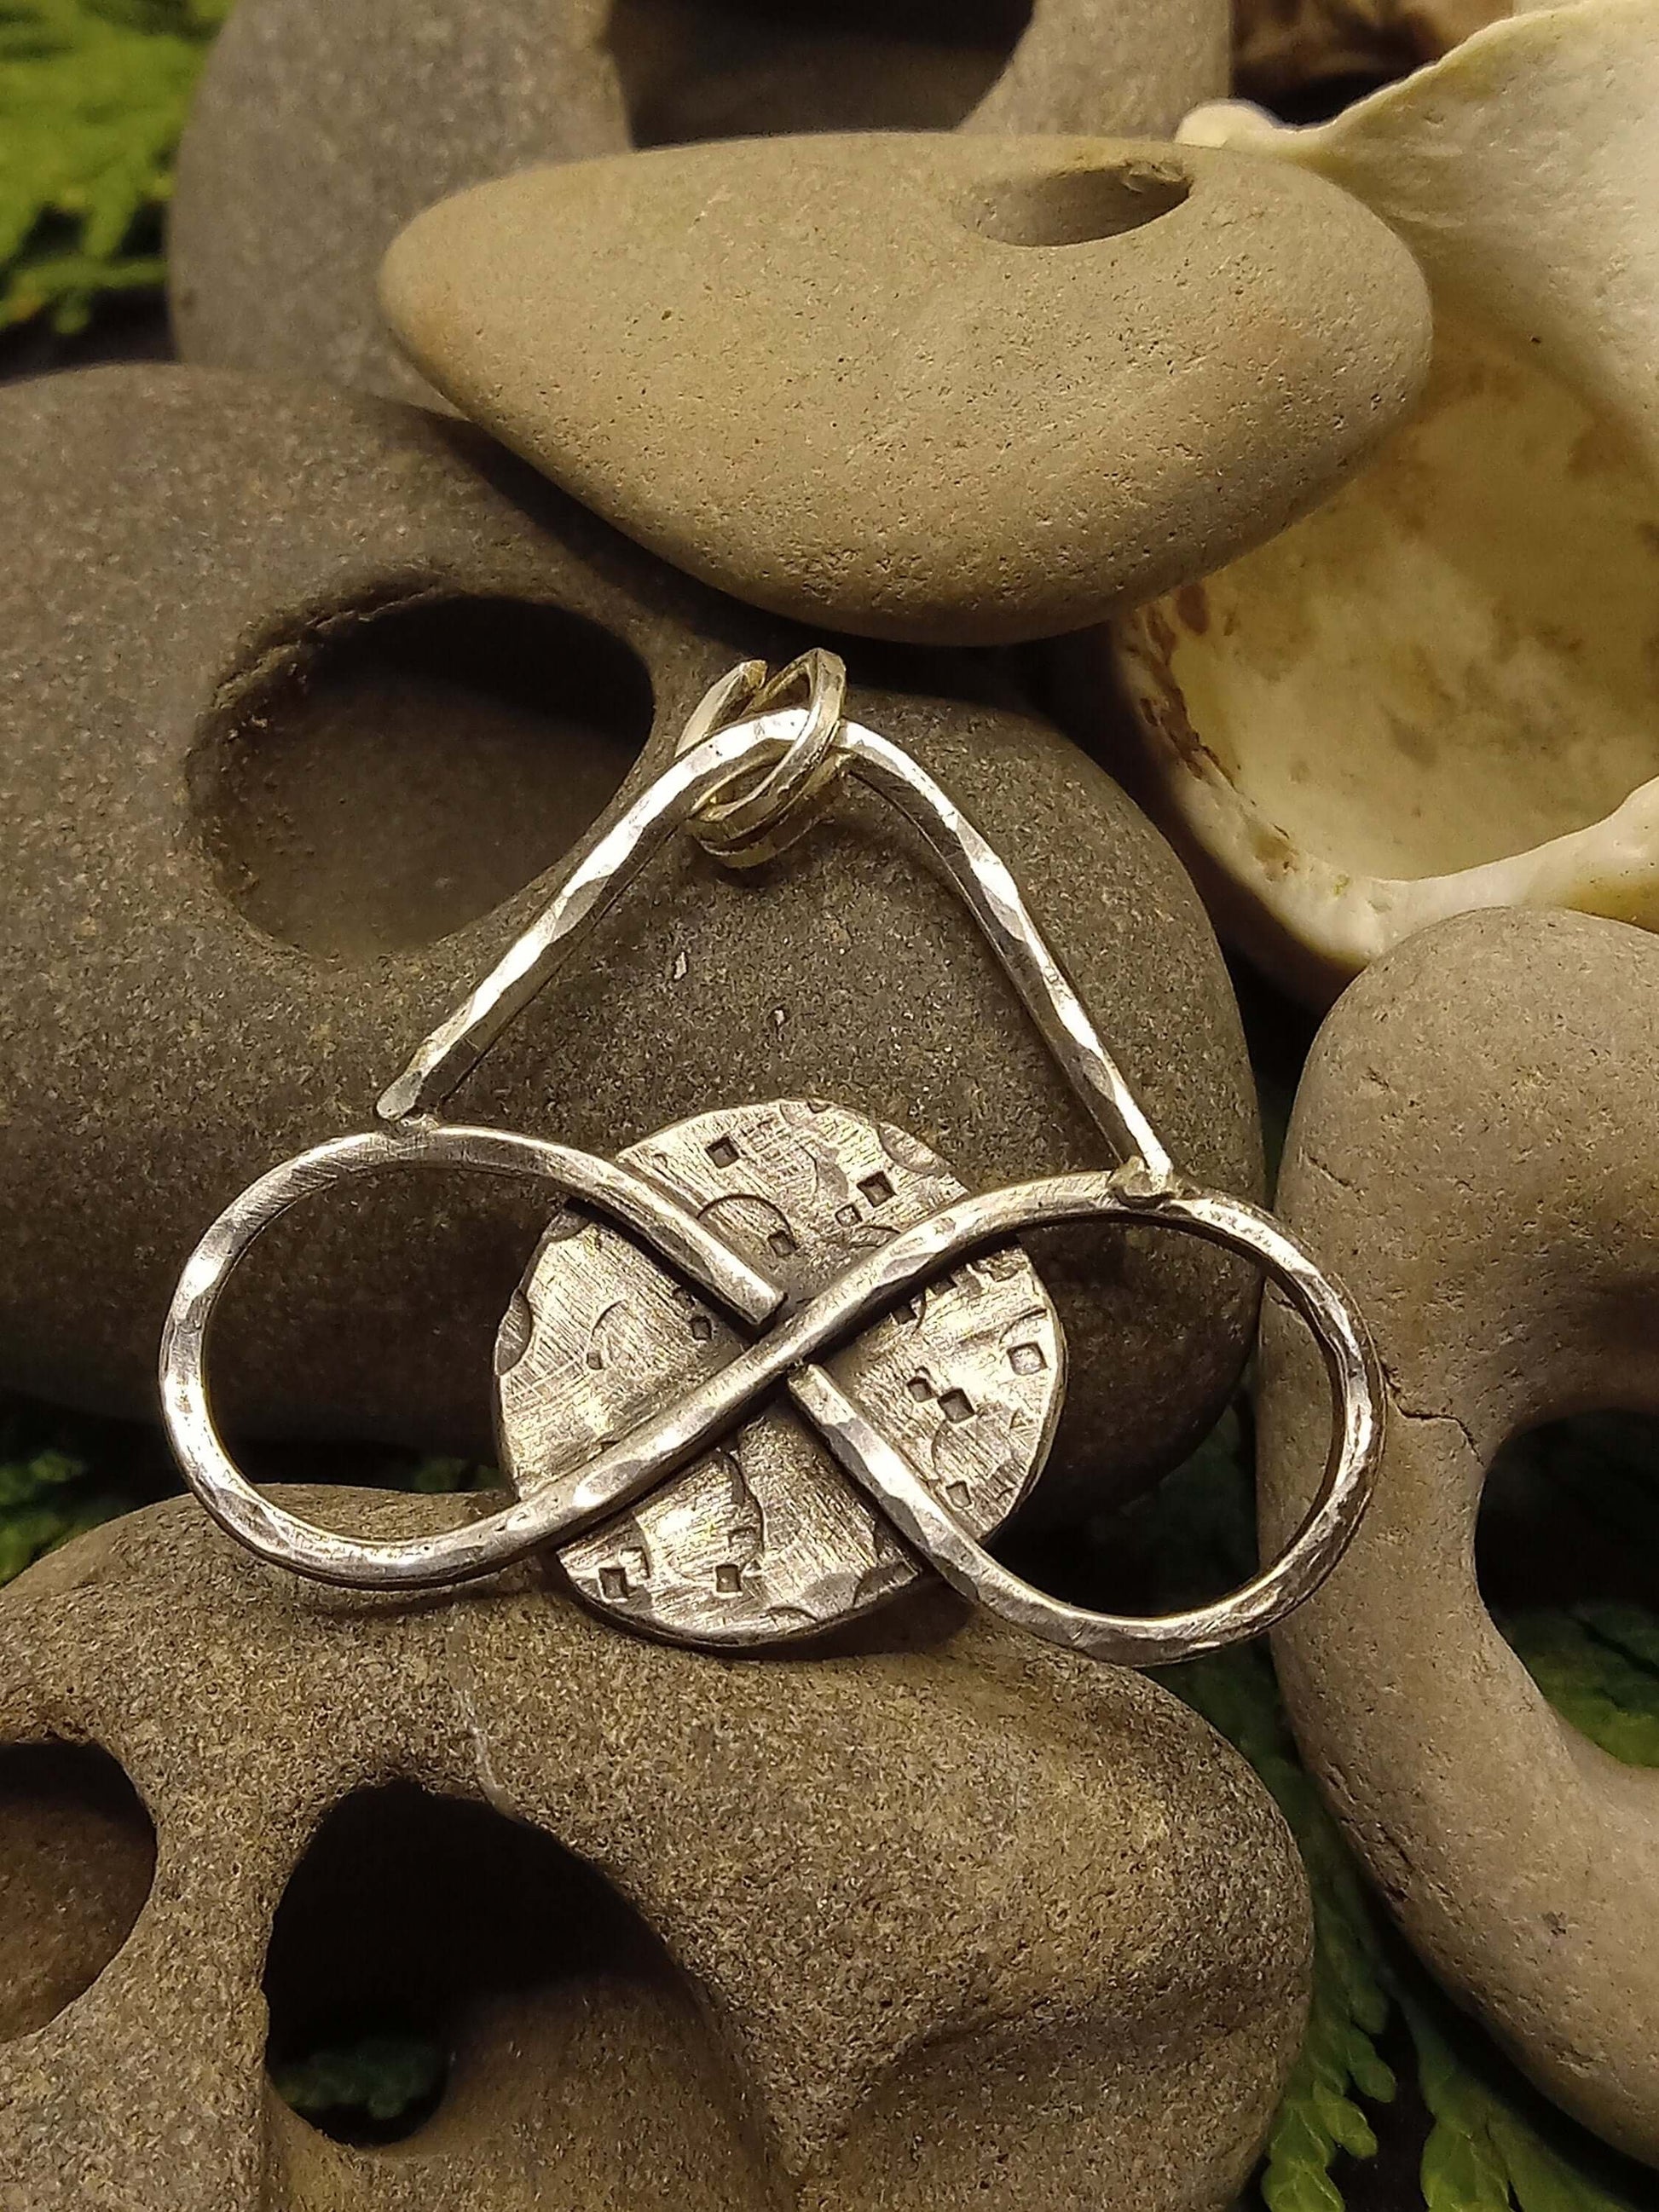  Medium sized silver pendant with dark patina that depicts a horizontal eternity symbol inlaid over a full moon rested on hagstones.